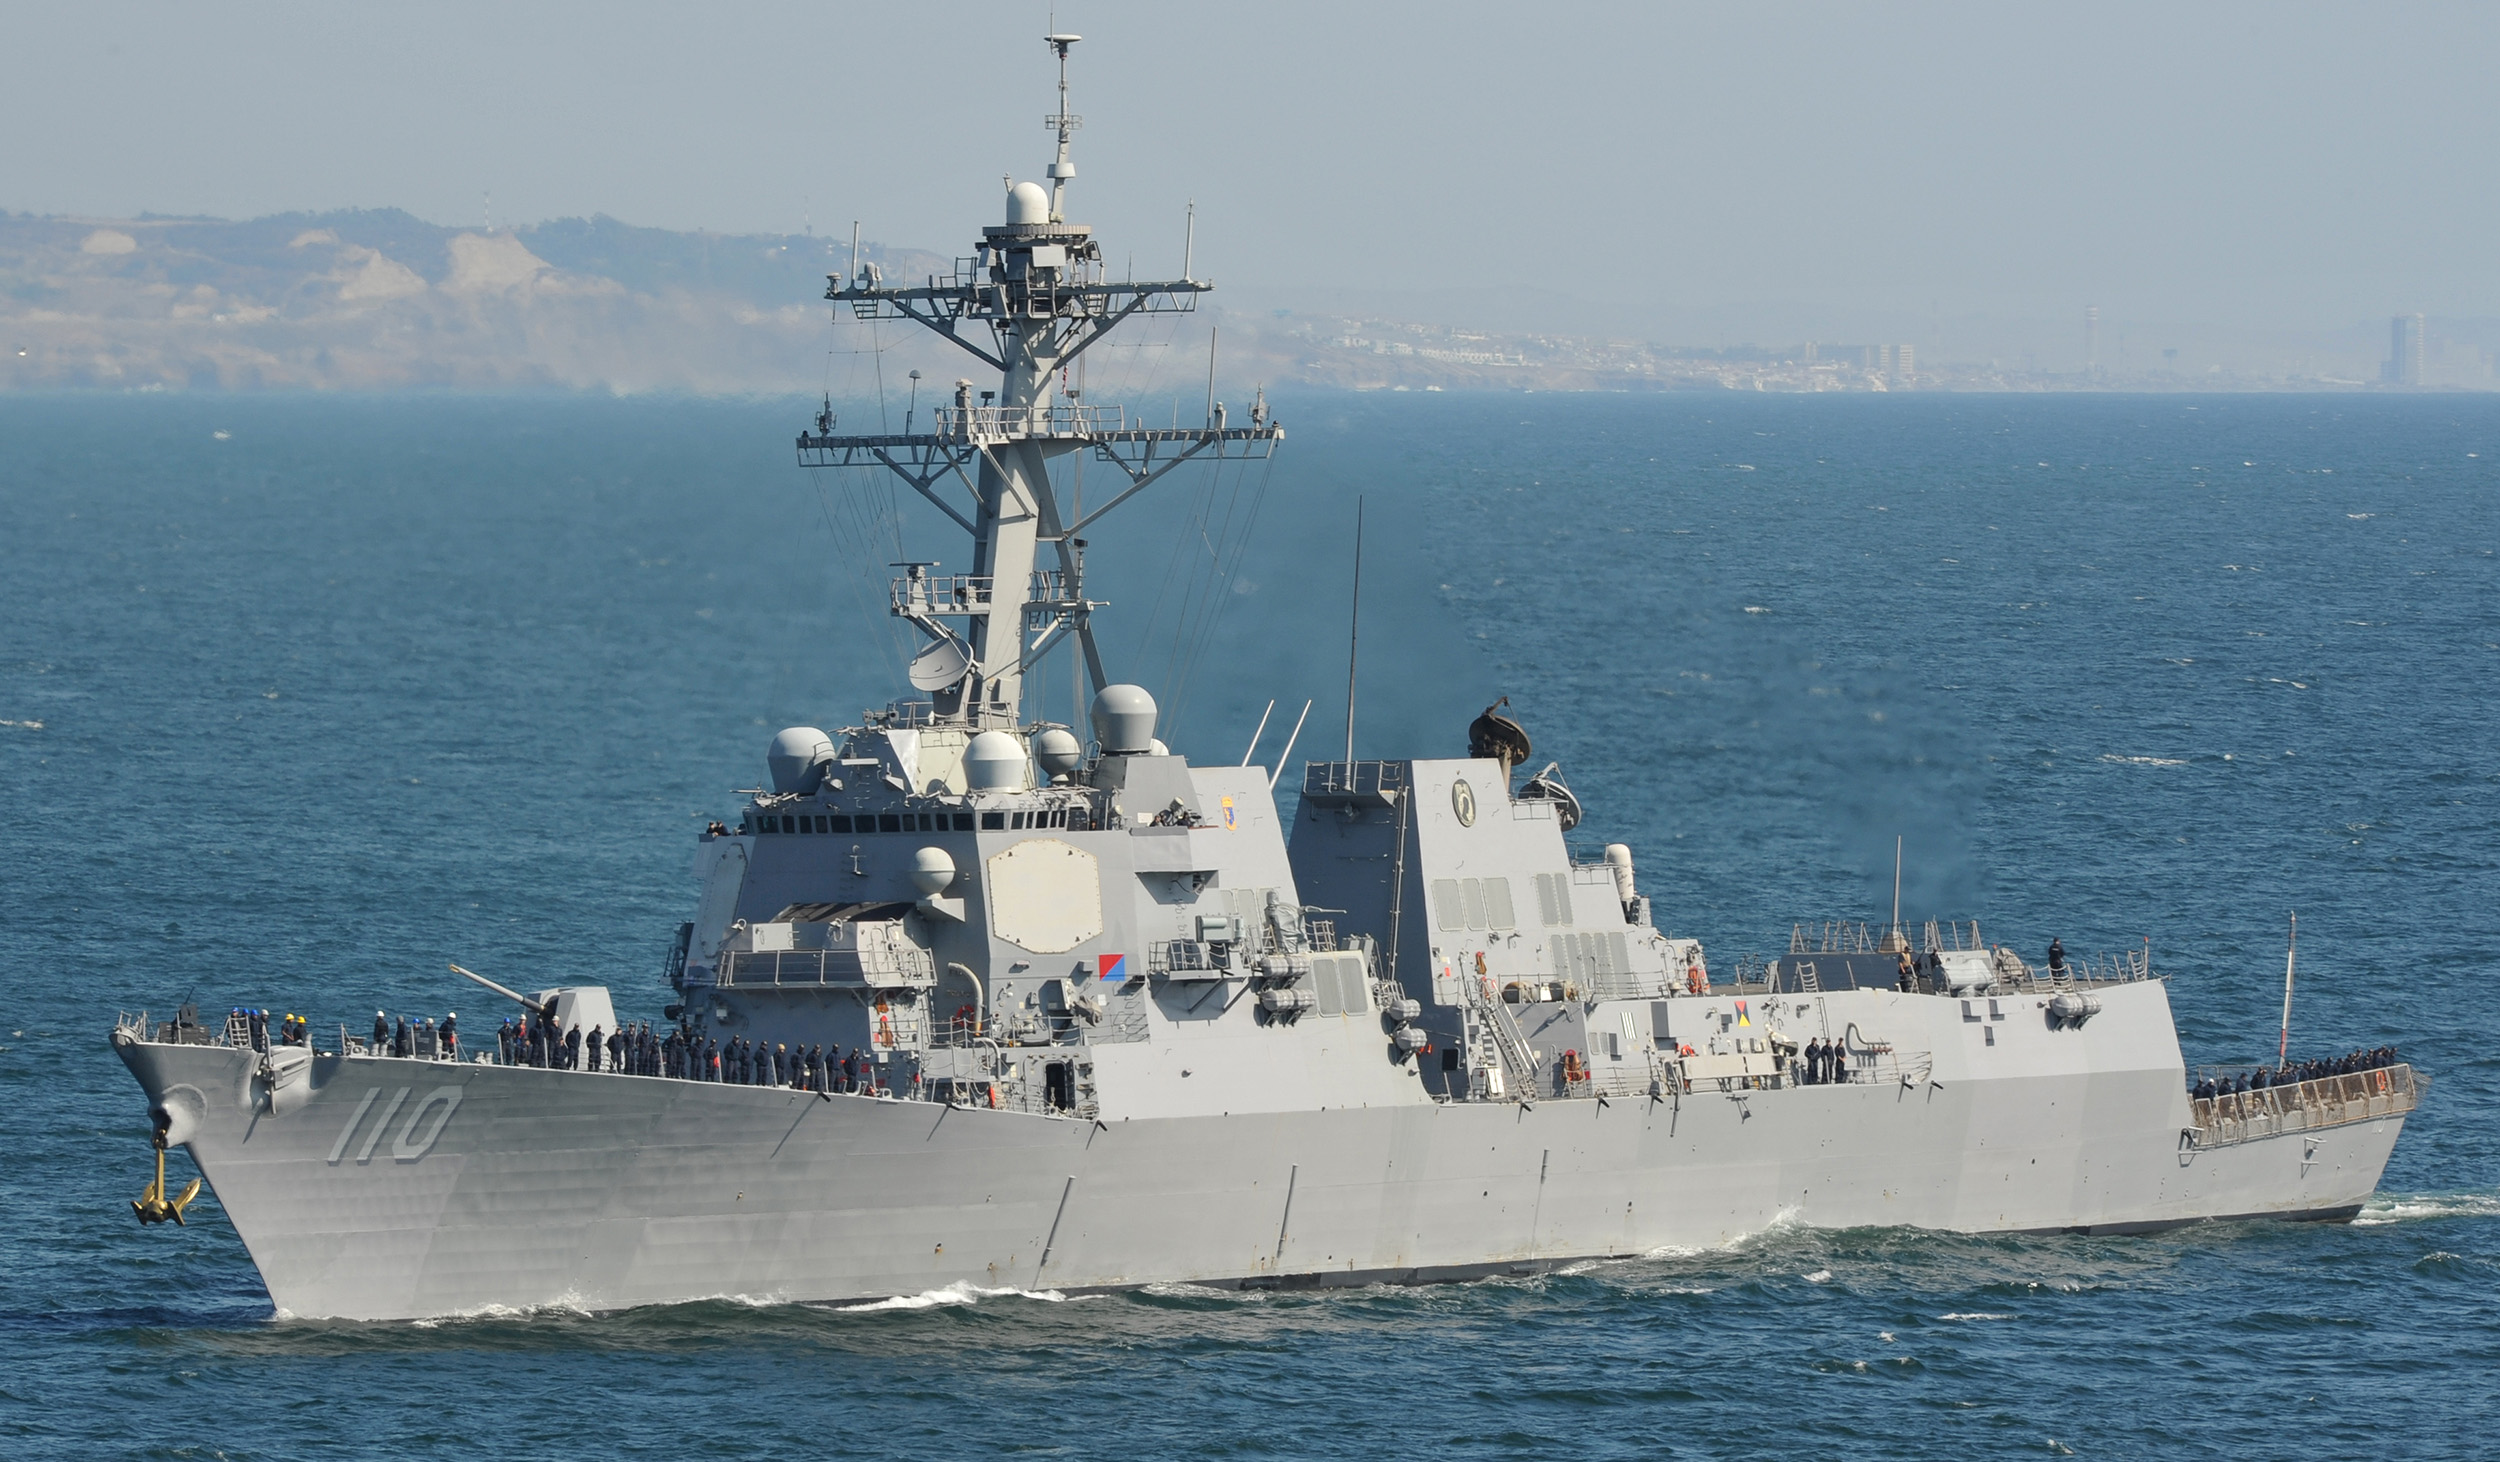 150504-N-OI810-121 PACIFIC OCEAN (May 4, 2015) – The guided-missile destroyer USS William P. Lawrence (DDG 110) steams toward San Diego Harbor. (U.S. Navy photo by Mass Communication Specialist 3rd Class Nathan Burke/Released)